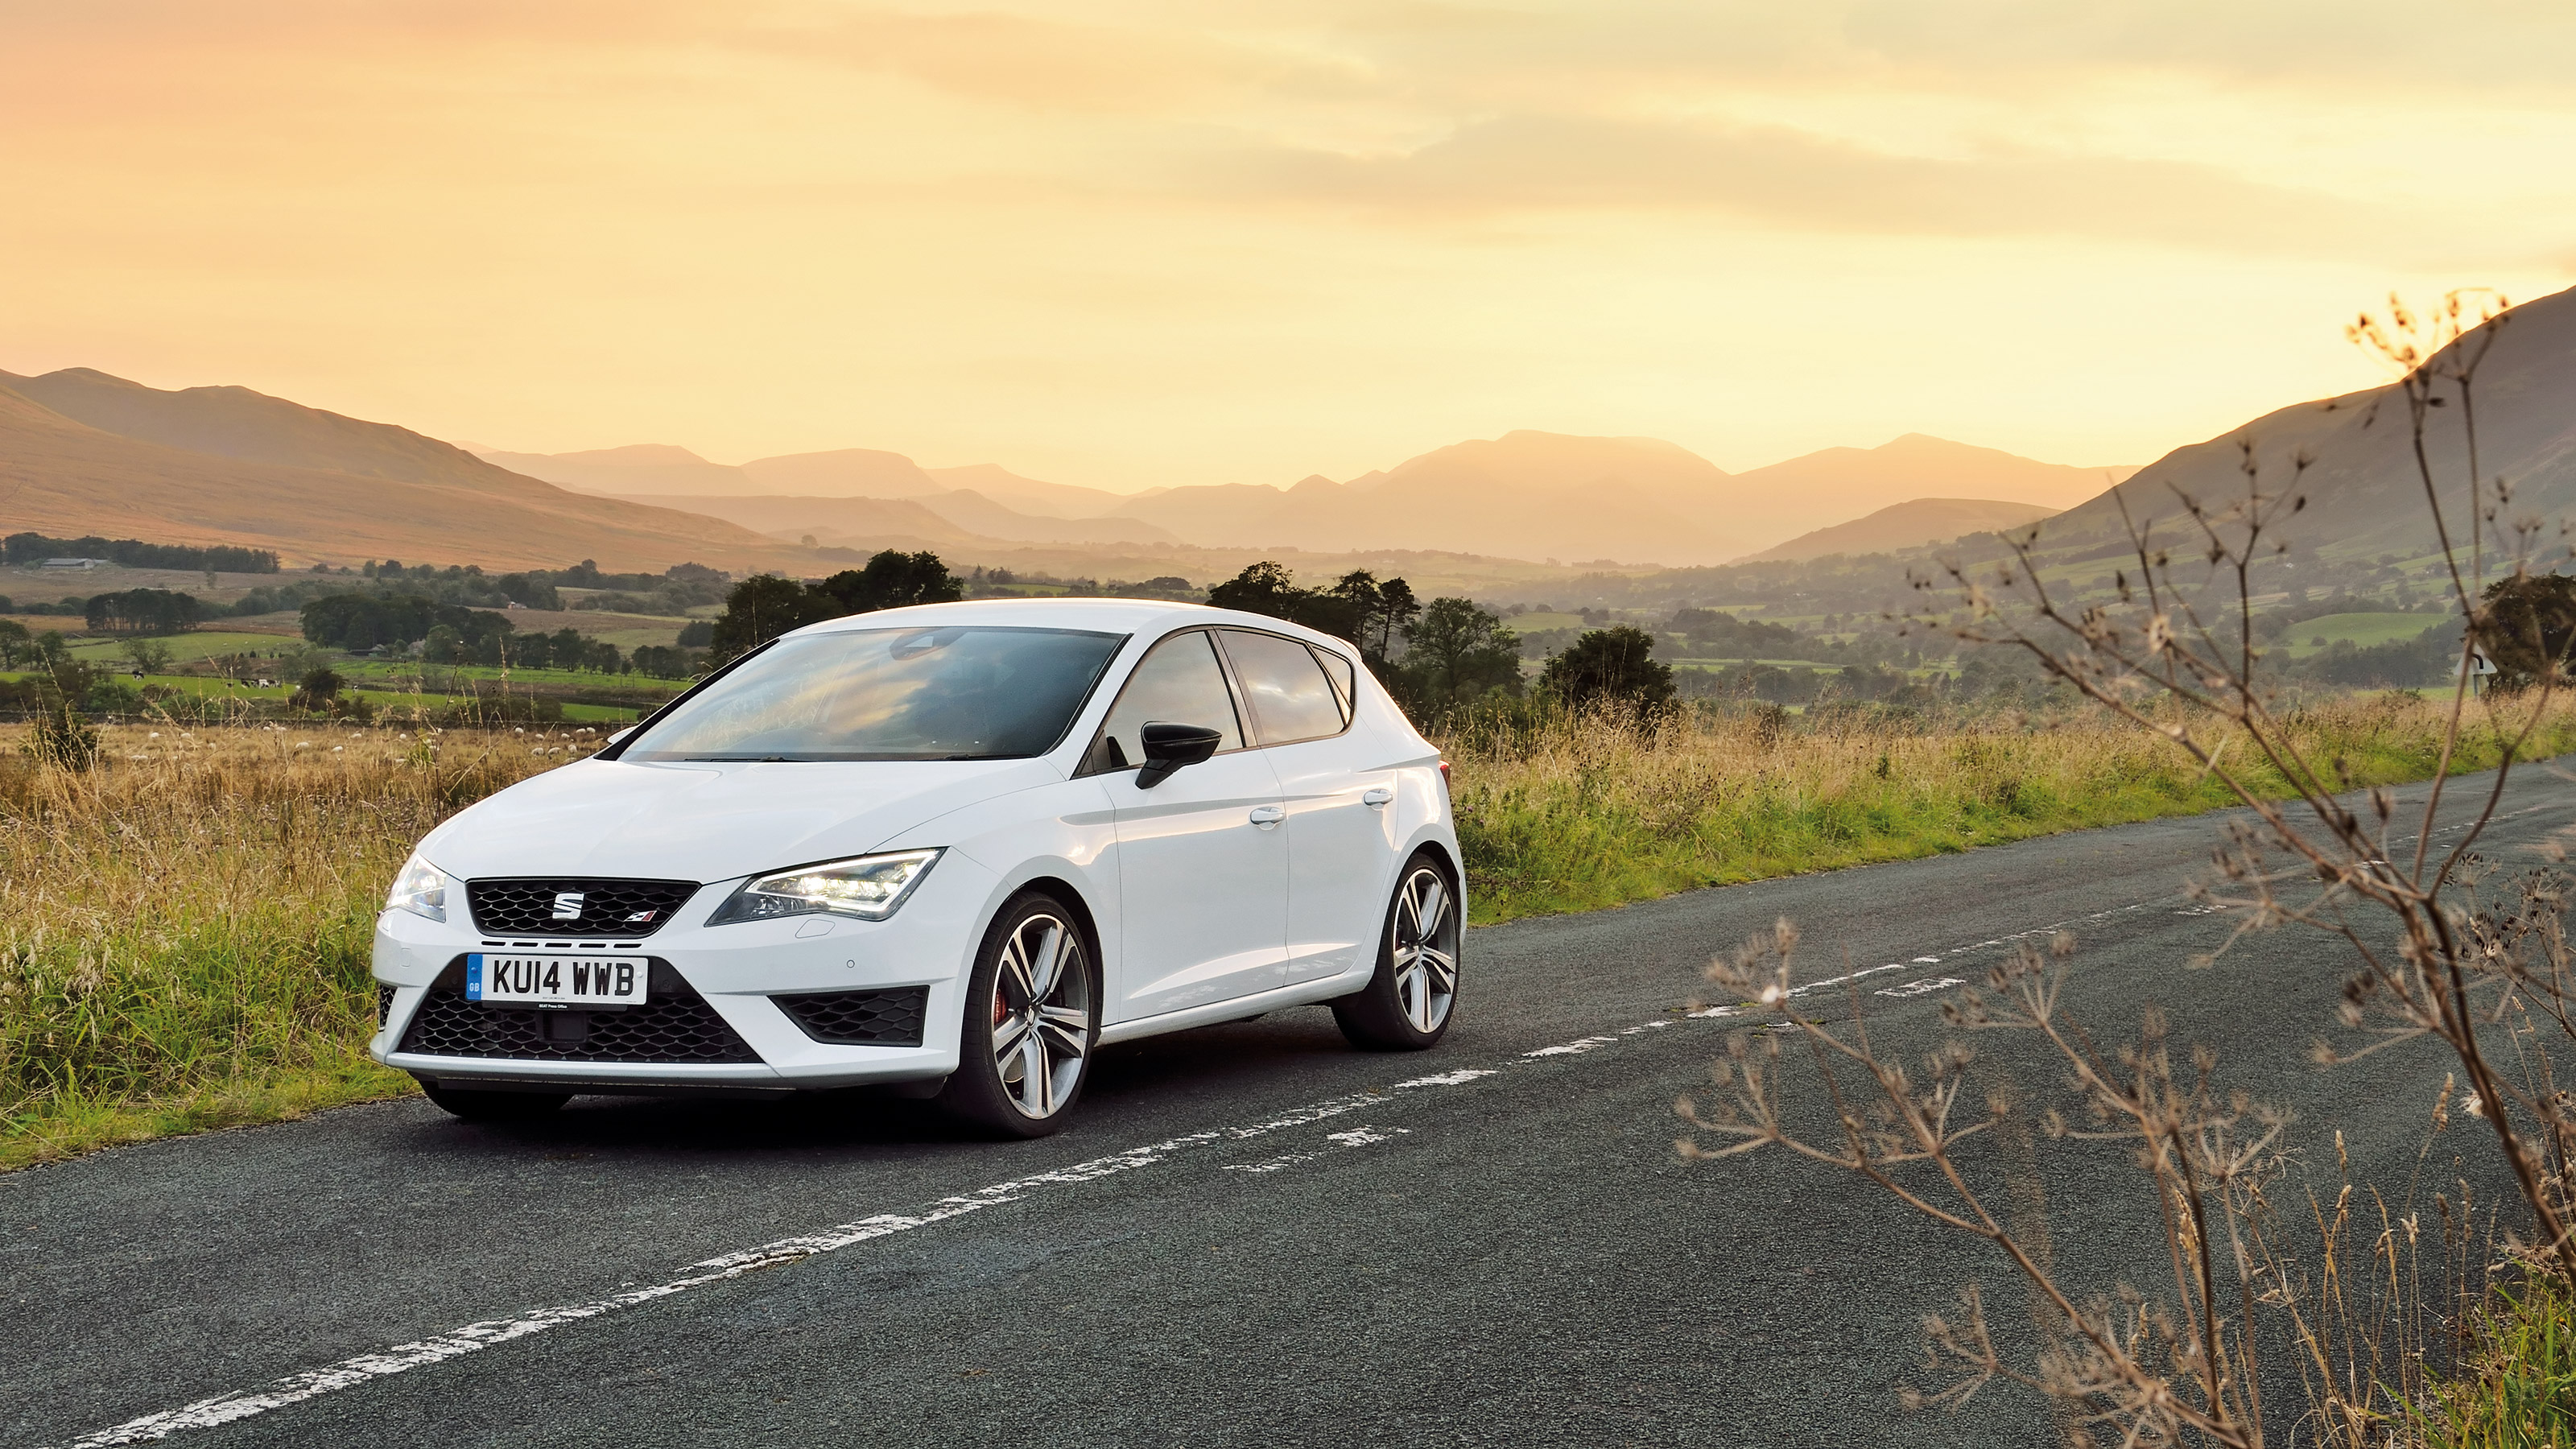 SEAT Leon Cupra 300 review - prices, specs and 0-60 time